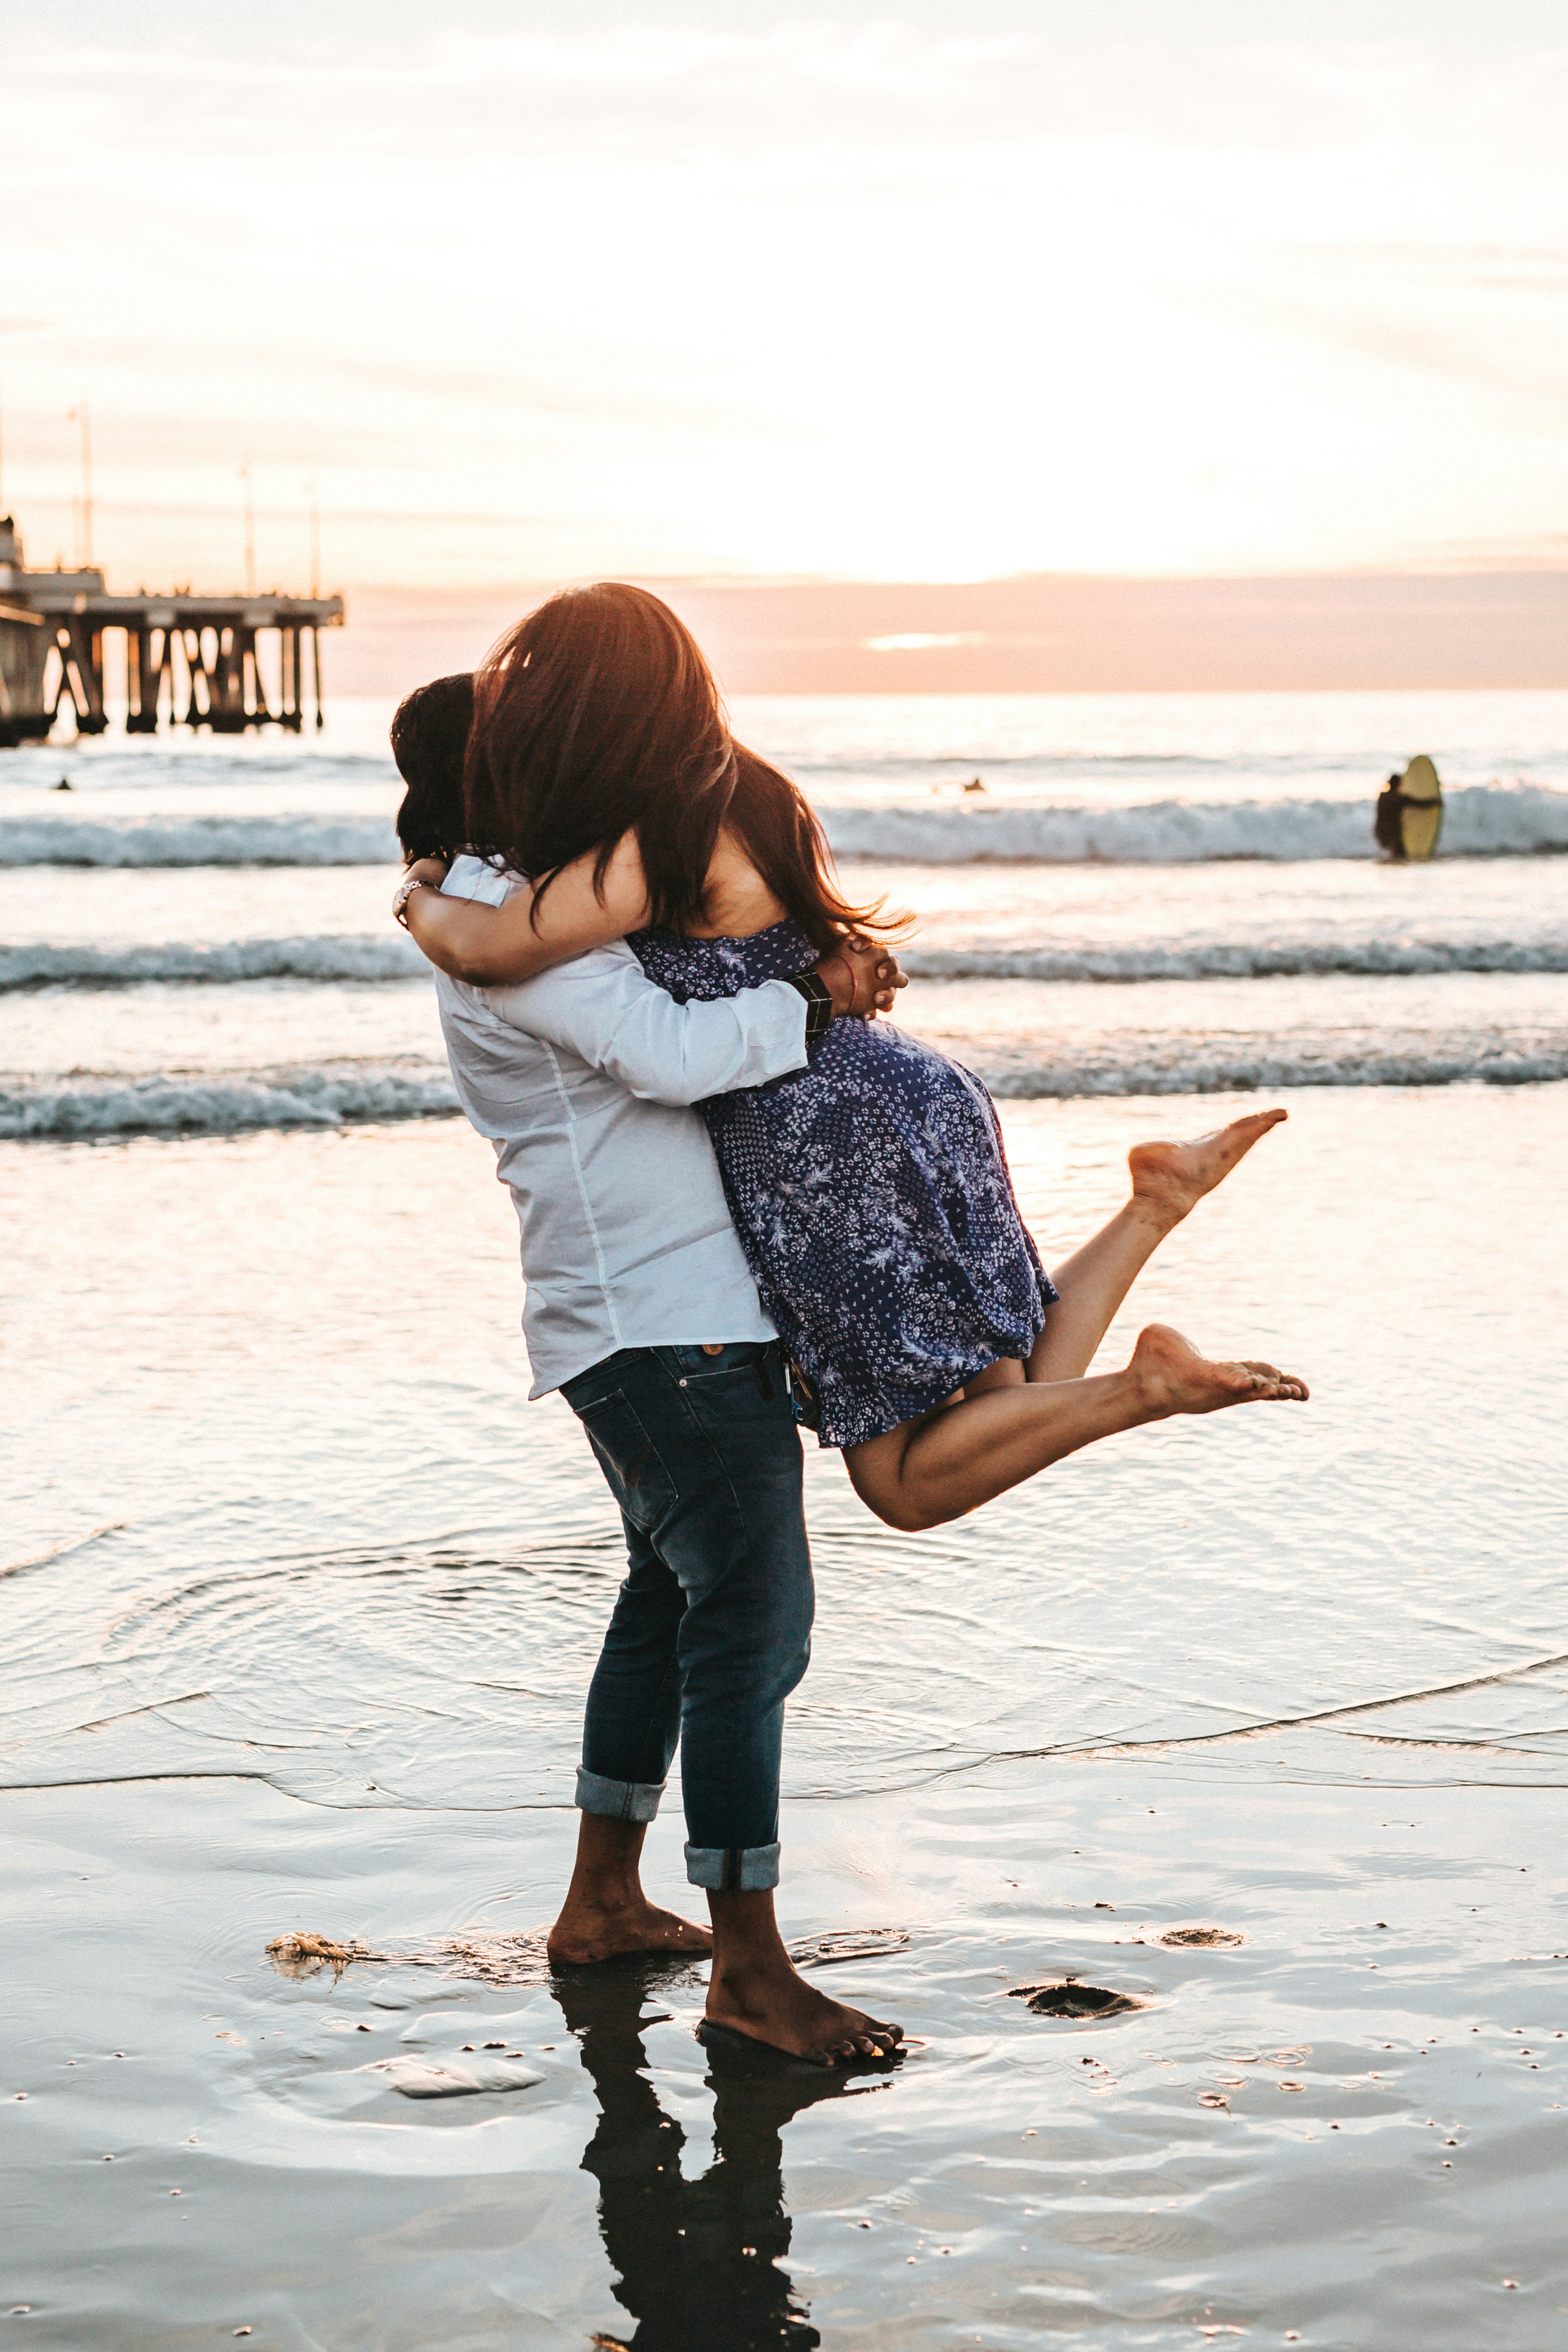 Couple Hugging Pictures Download Free Images on Unsplash photo